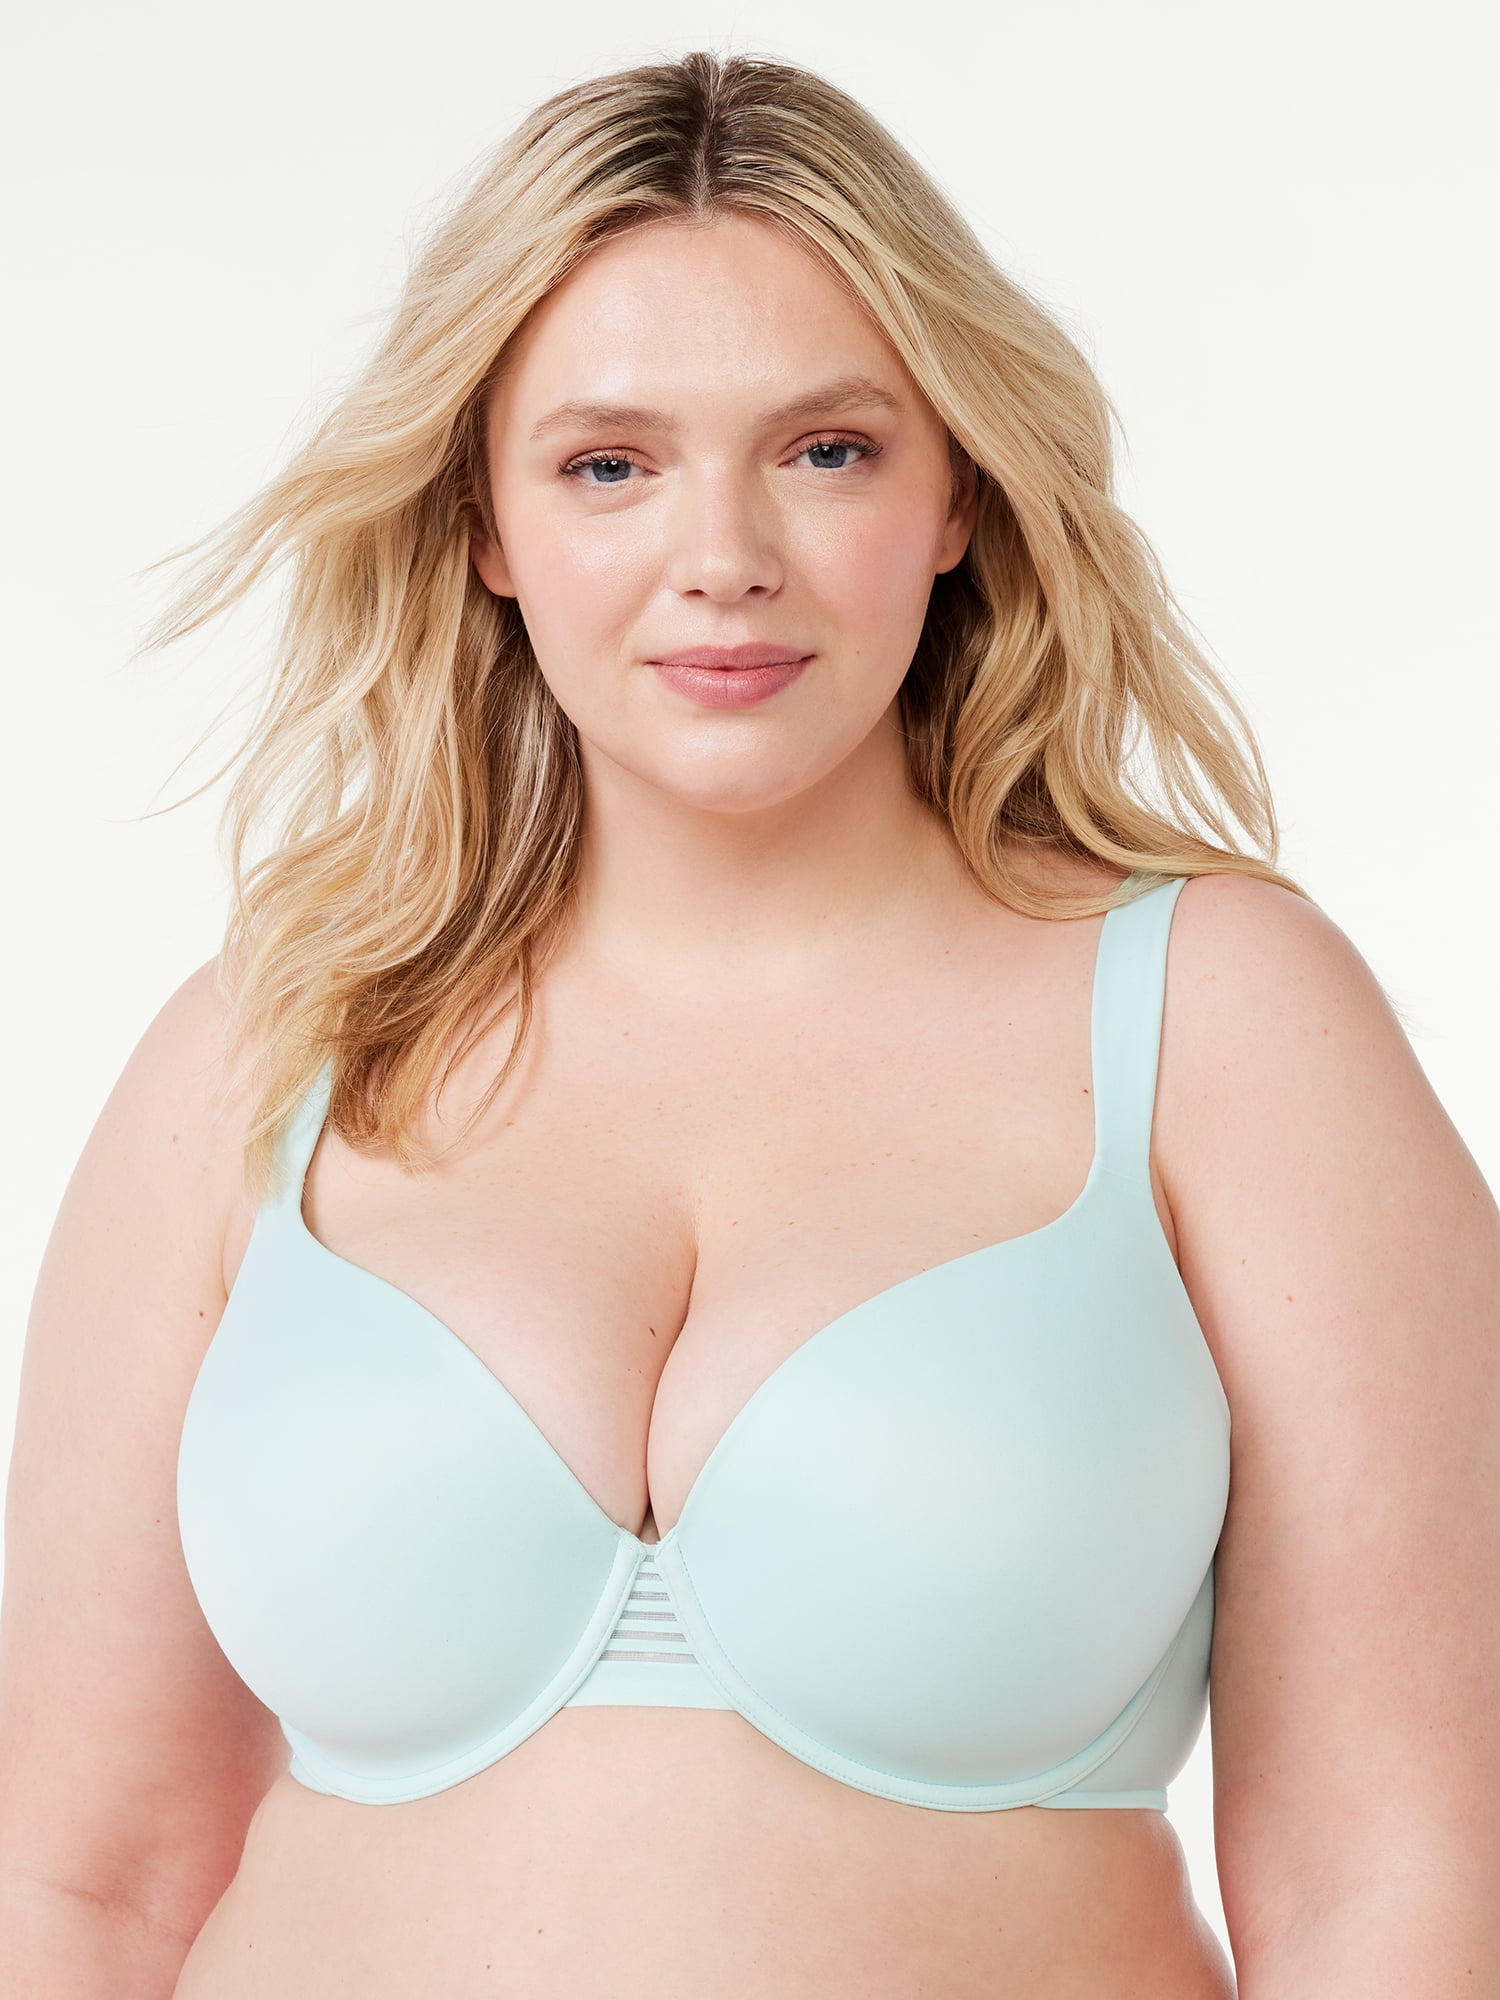 large bosom bra underwired full cup size 34 36 38 40 42 44 46 D DD E F G H J